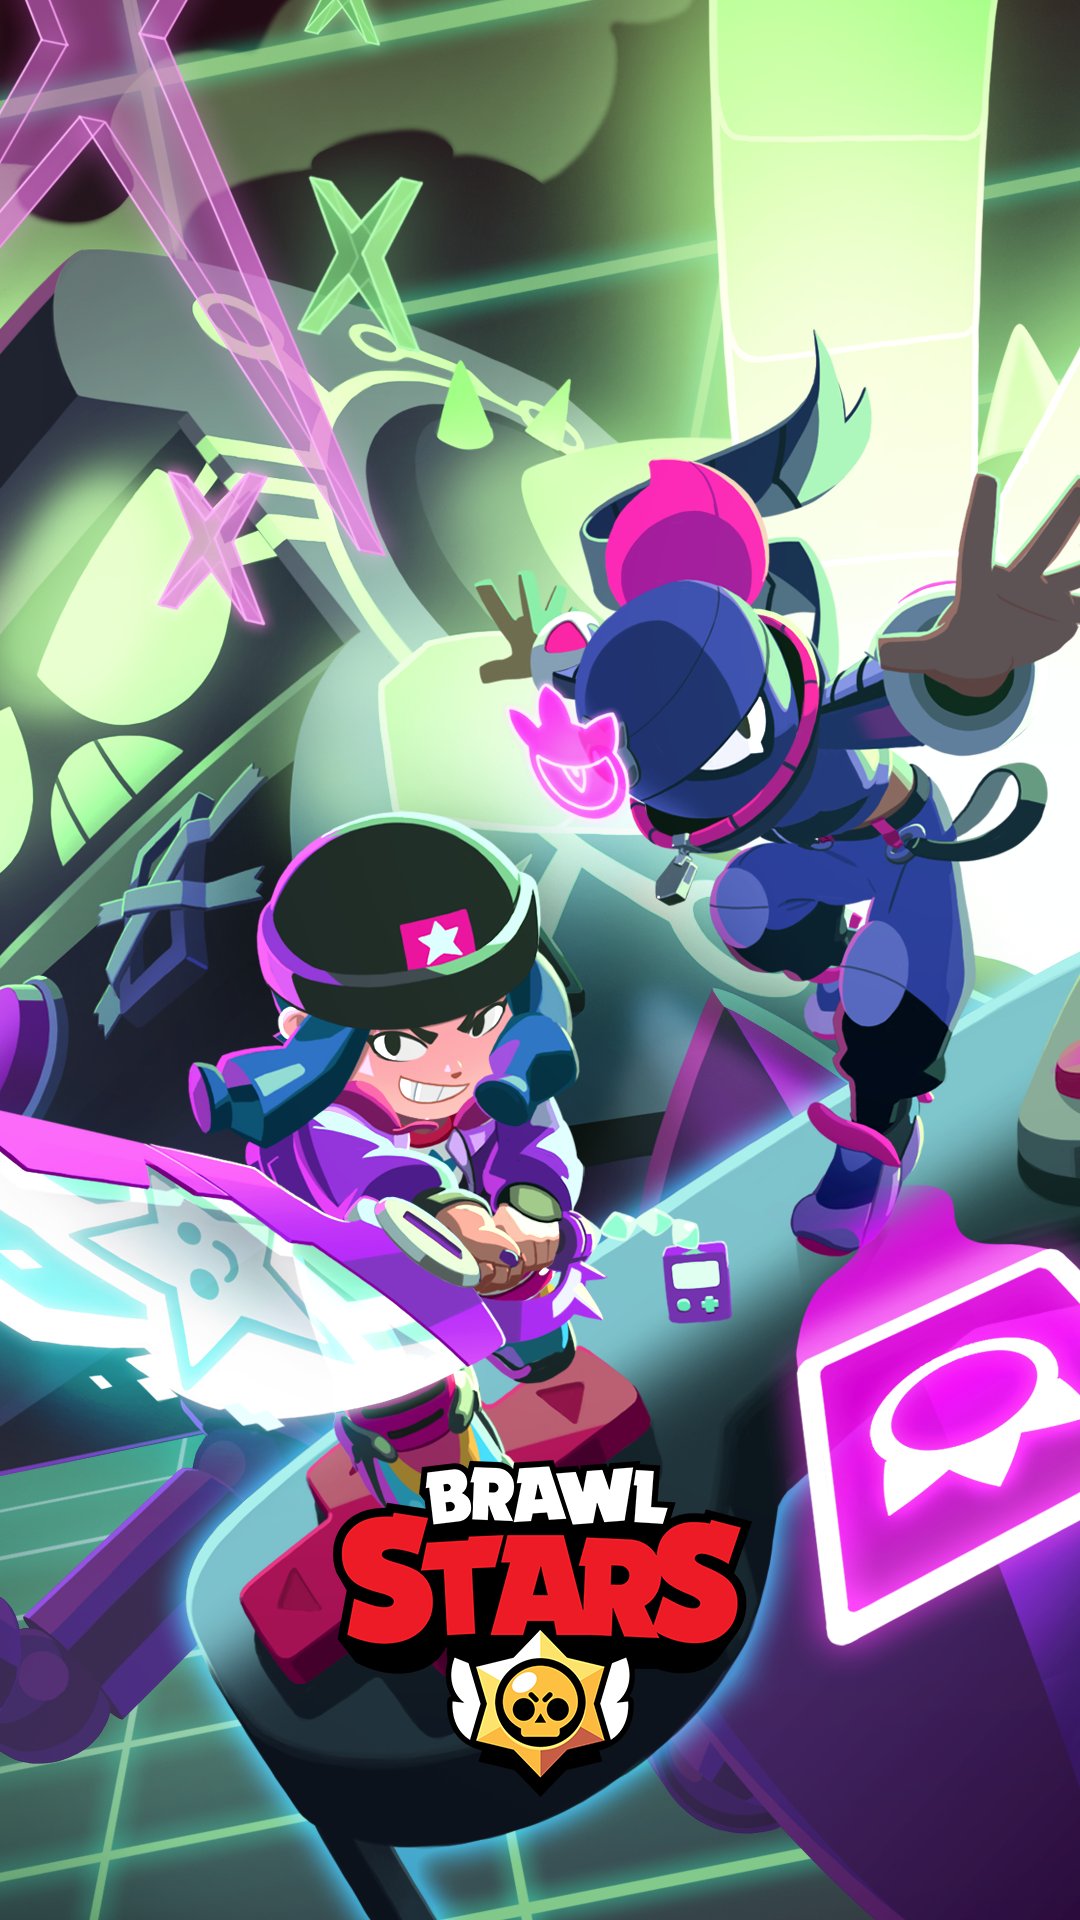 Brawl Stars On Twitter How About A New Wallpaper For Your Phone - brock pintado brawl stars